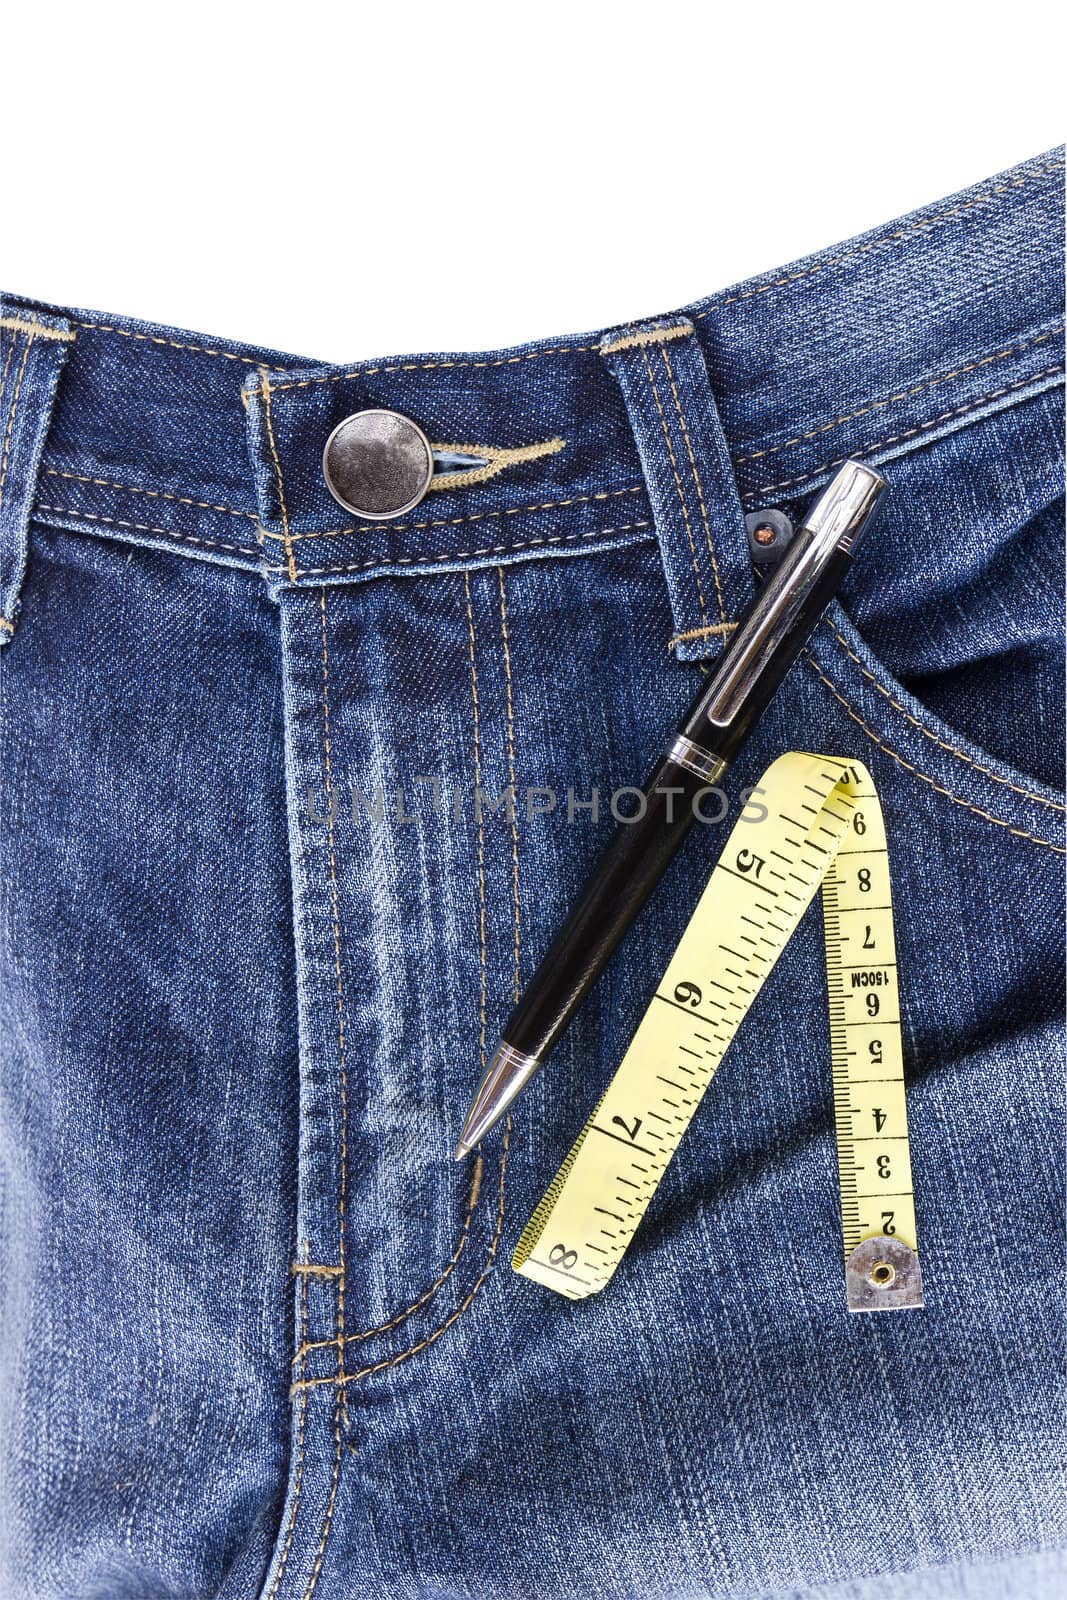 Jeans and measuring tape by stoonn